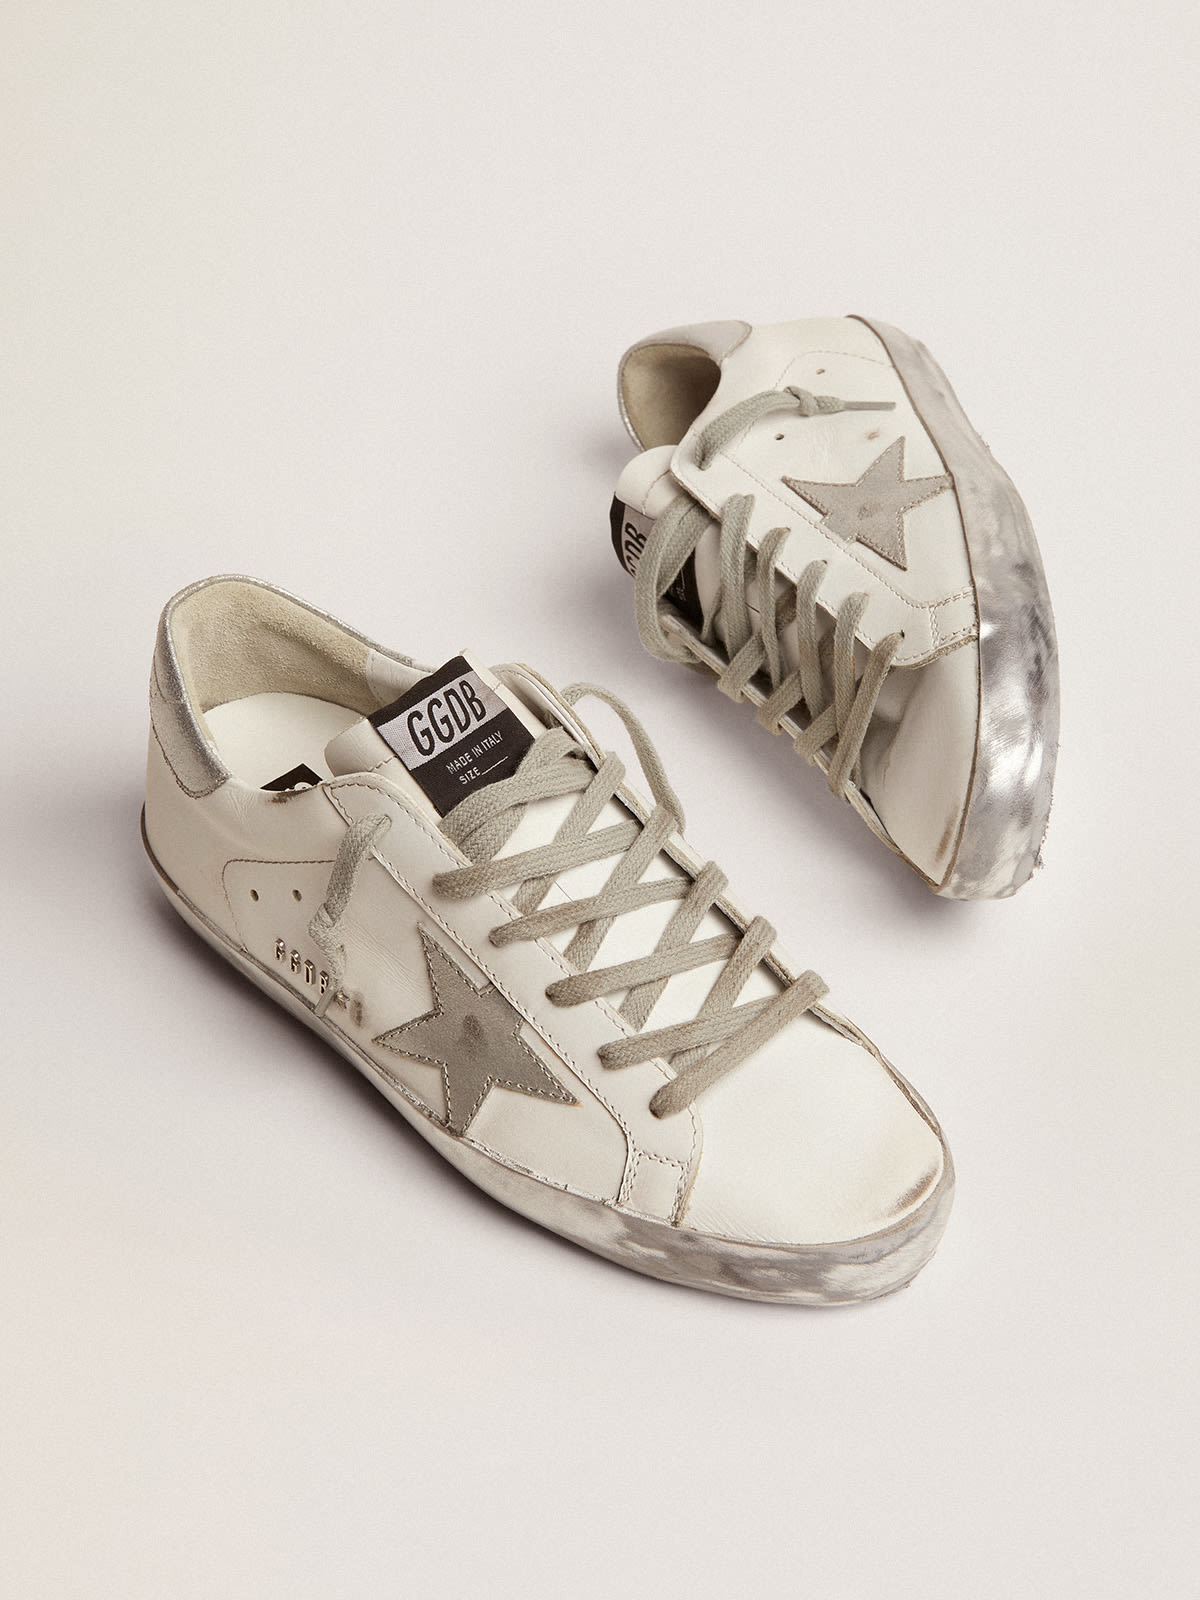 Golden Goose - Super-Star sneakers with silver sparkle foxing and metal stud lettering in 